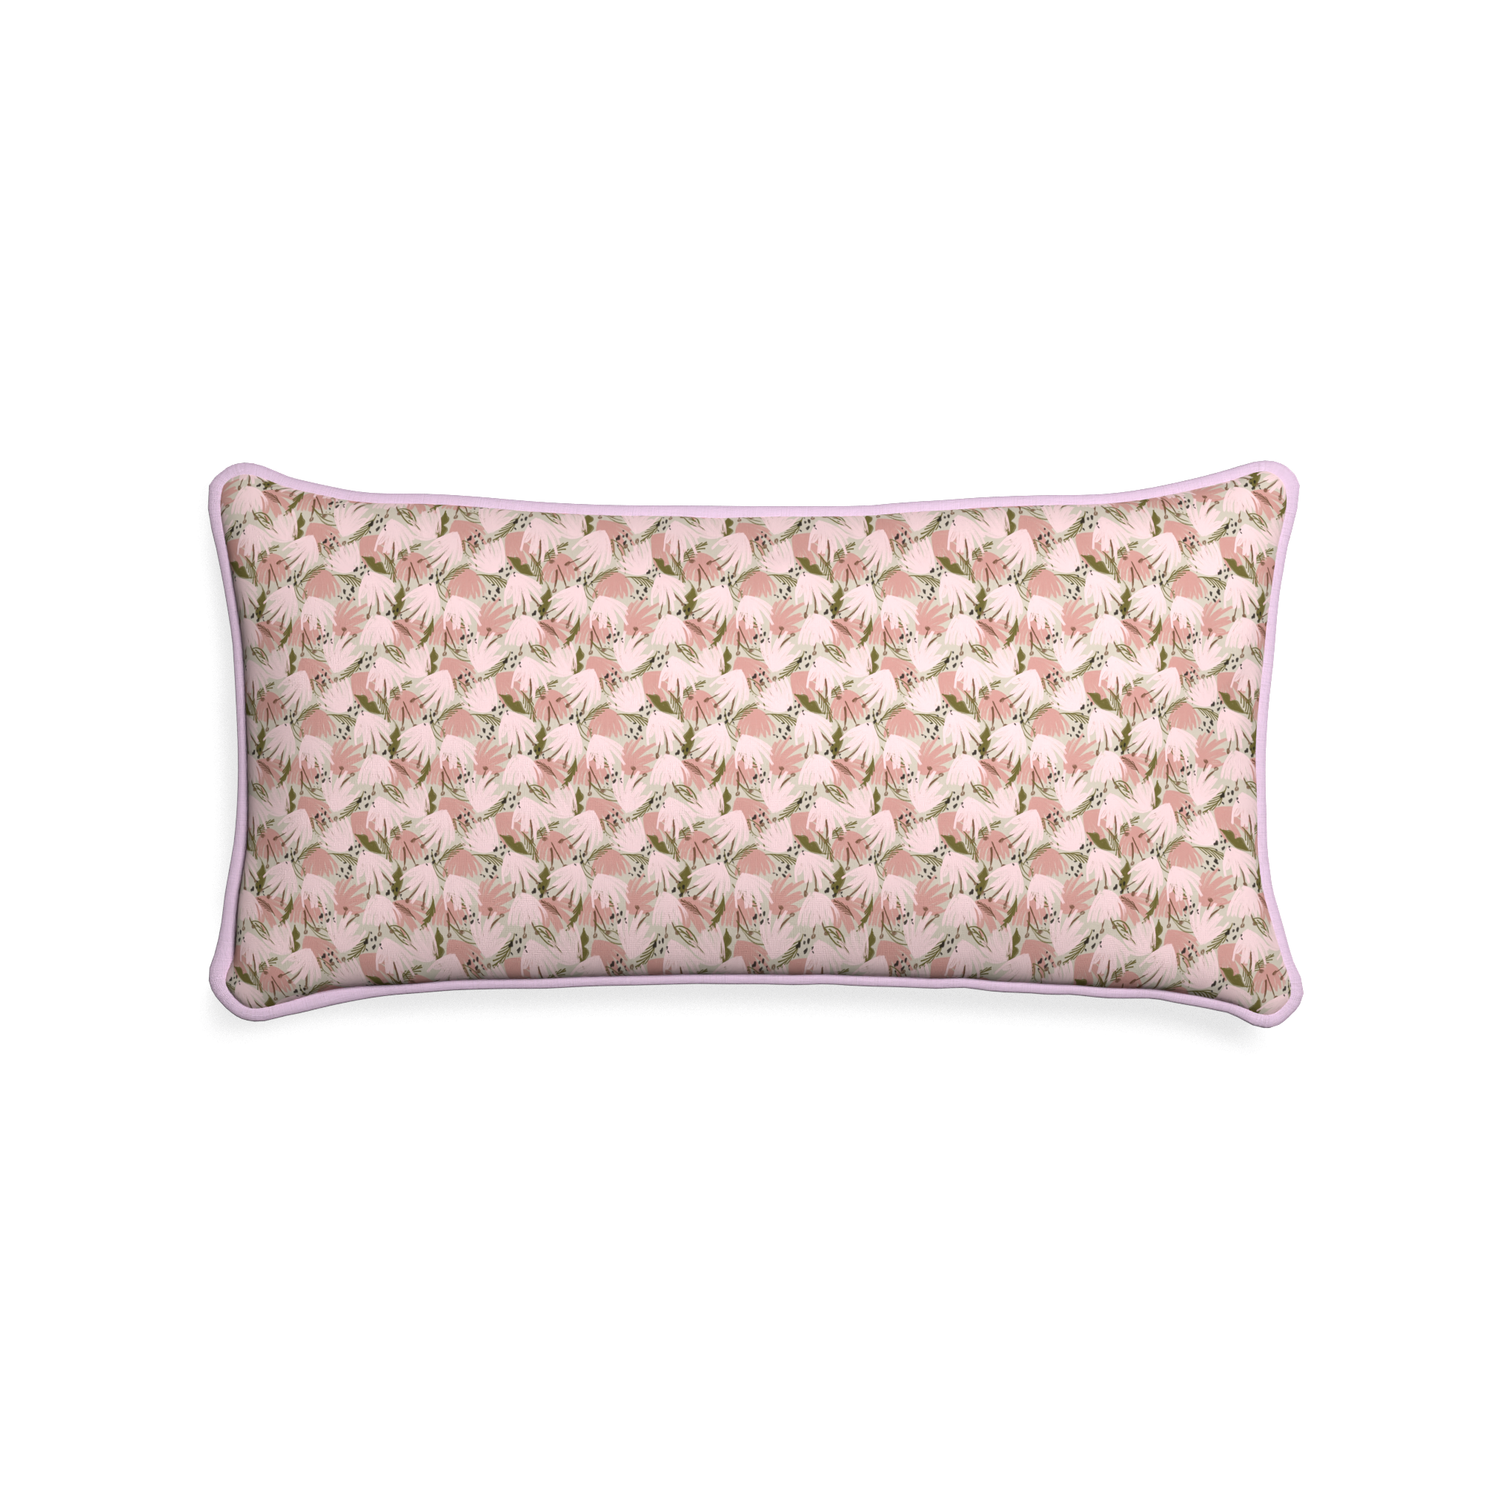 Midi-lumbar eden pink custom pink floralpillow with l piping on white background